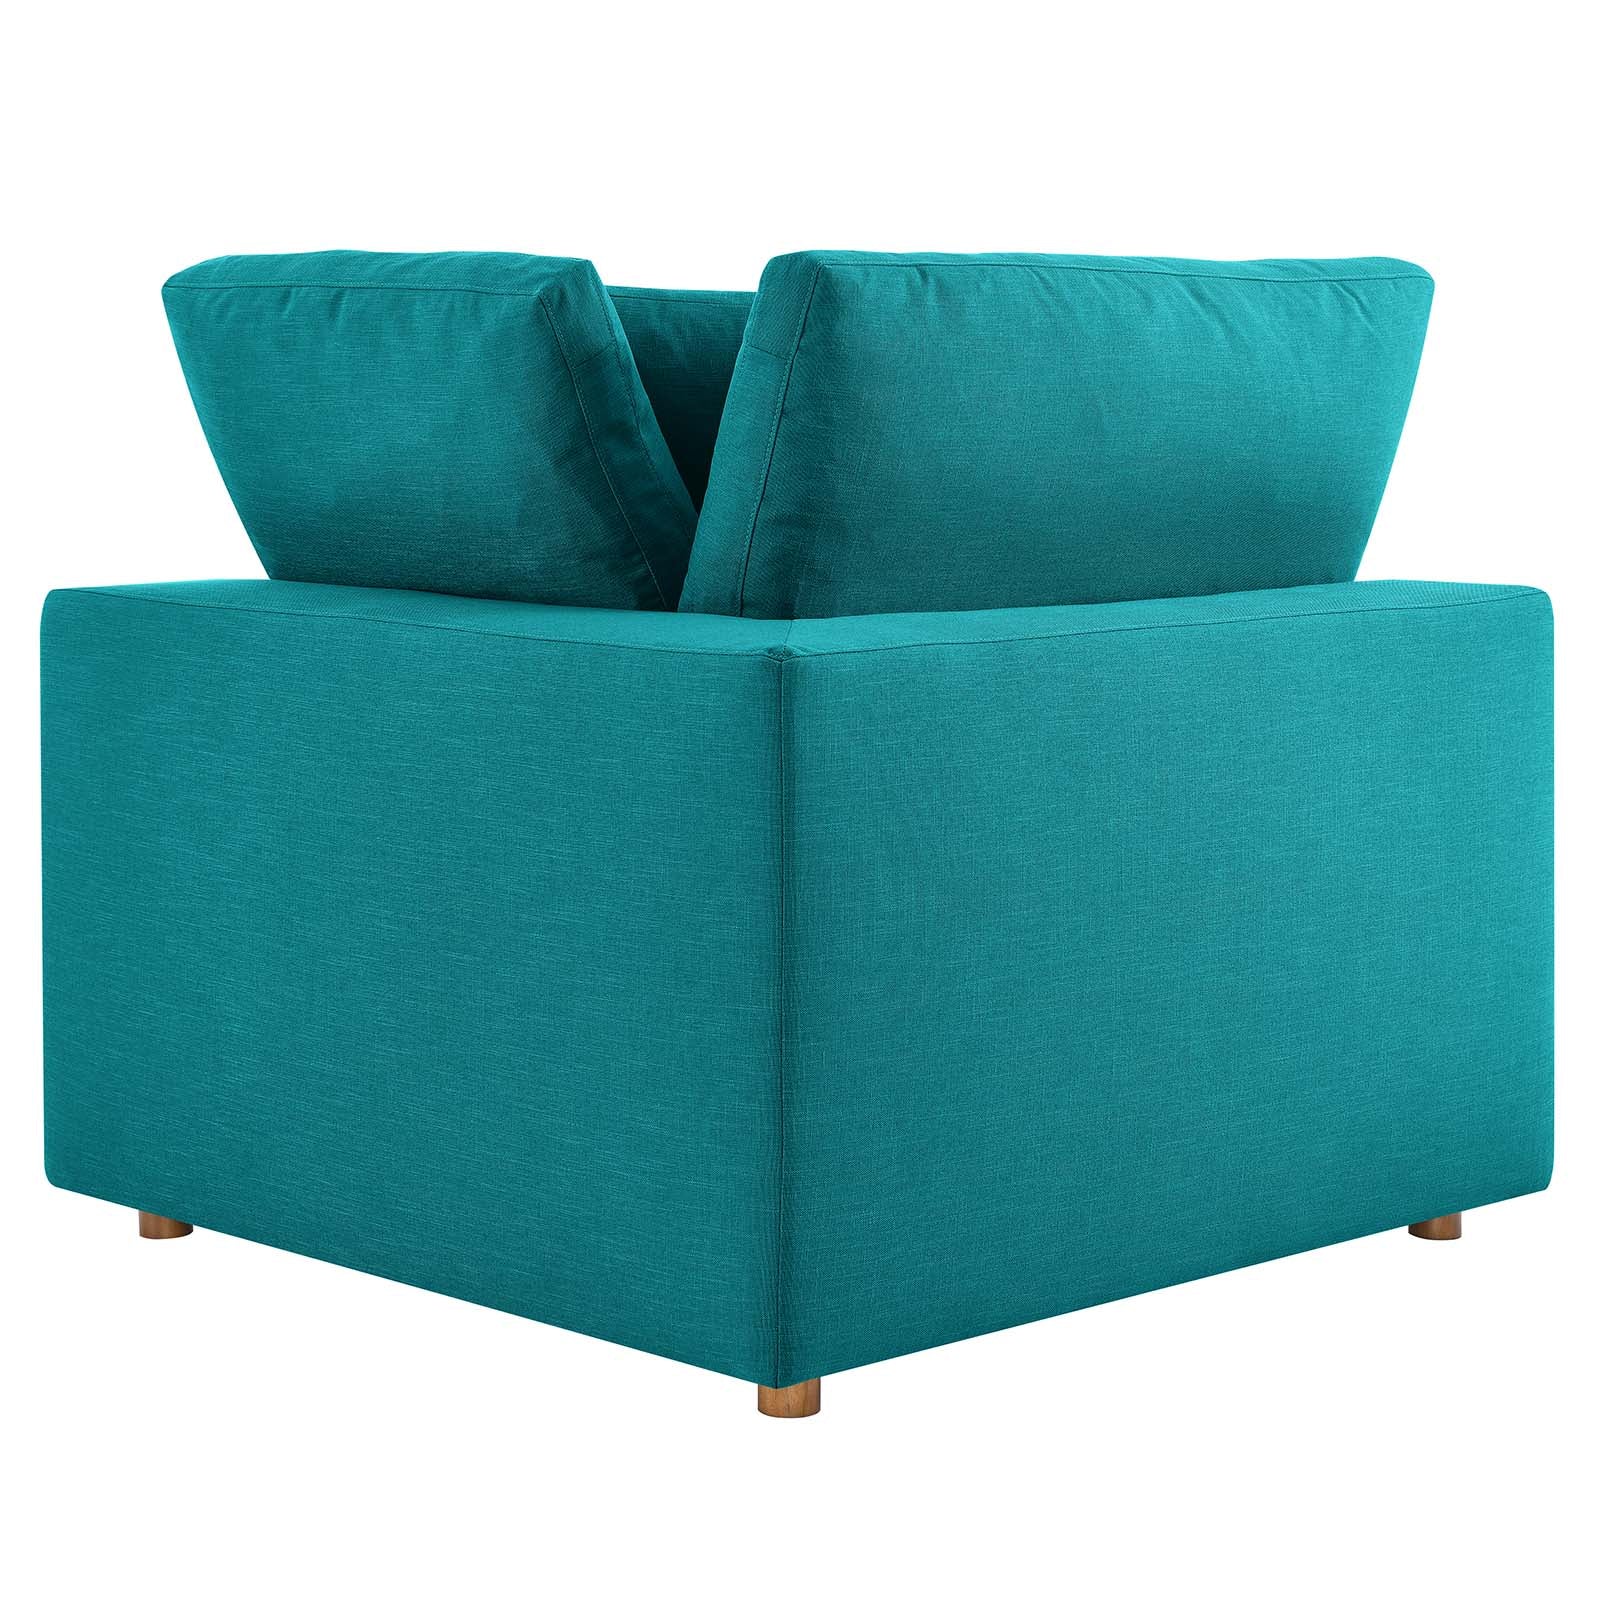 Modway Sectional Sofas - Commix Down Filled Overstuffed Reversible Sectional Sofa Teal